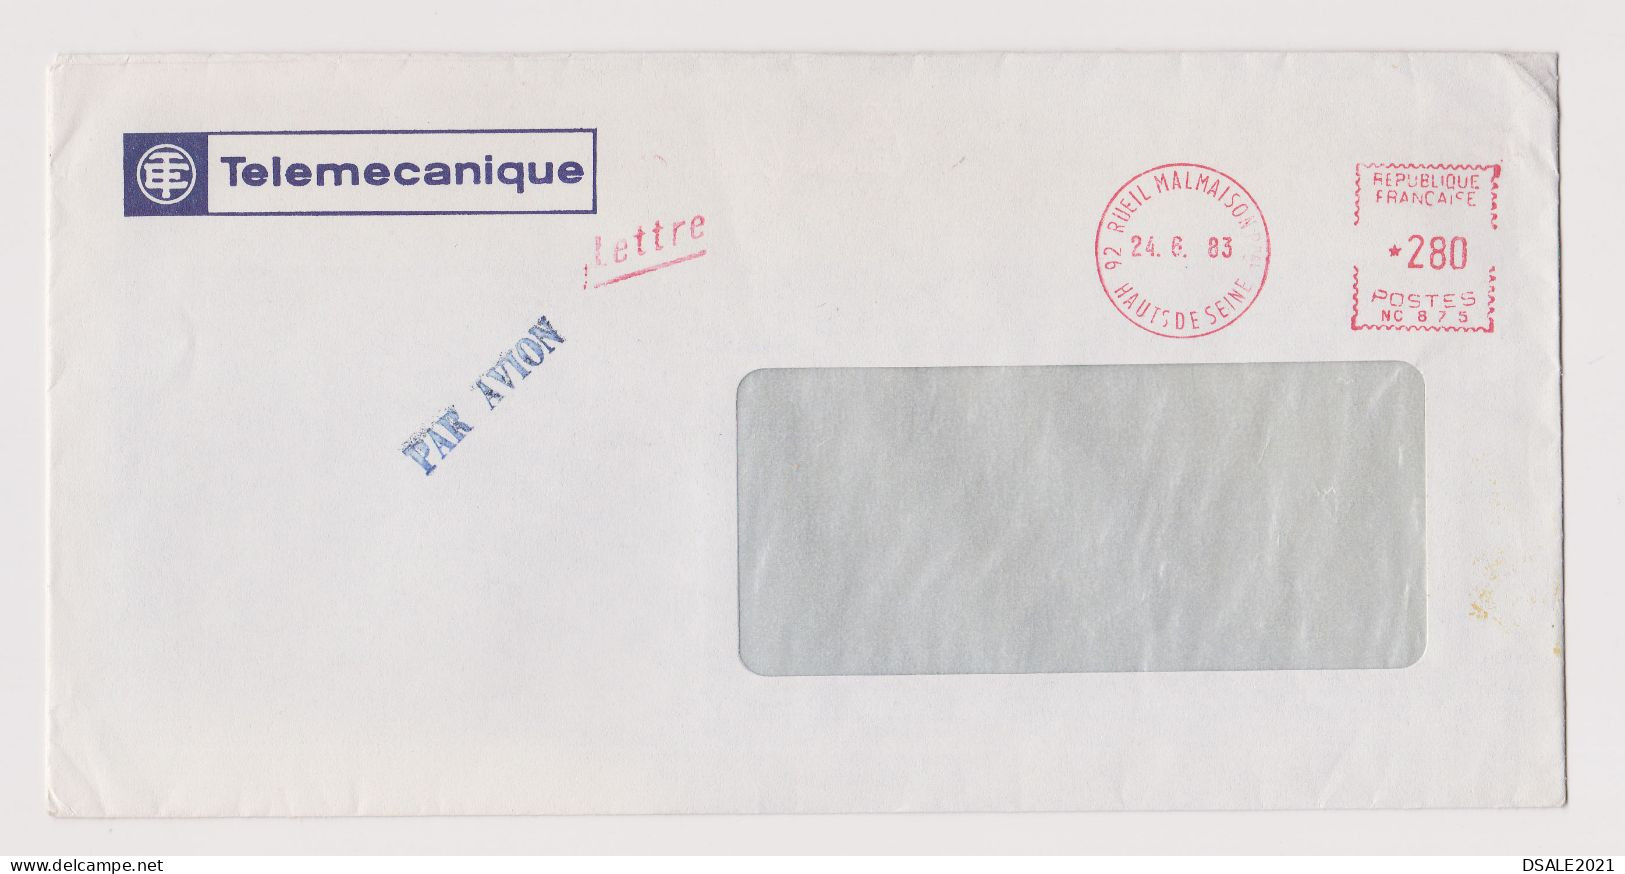 France 1983 Airmail Window Cover With Advertising Machine EMA METER Stamp Cachet, Sent Abroad (66856) - Covers & Documents